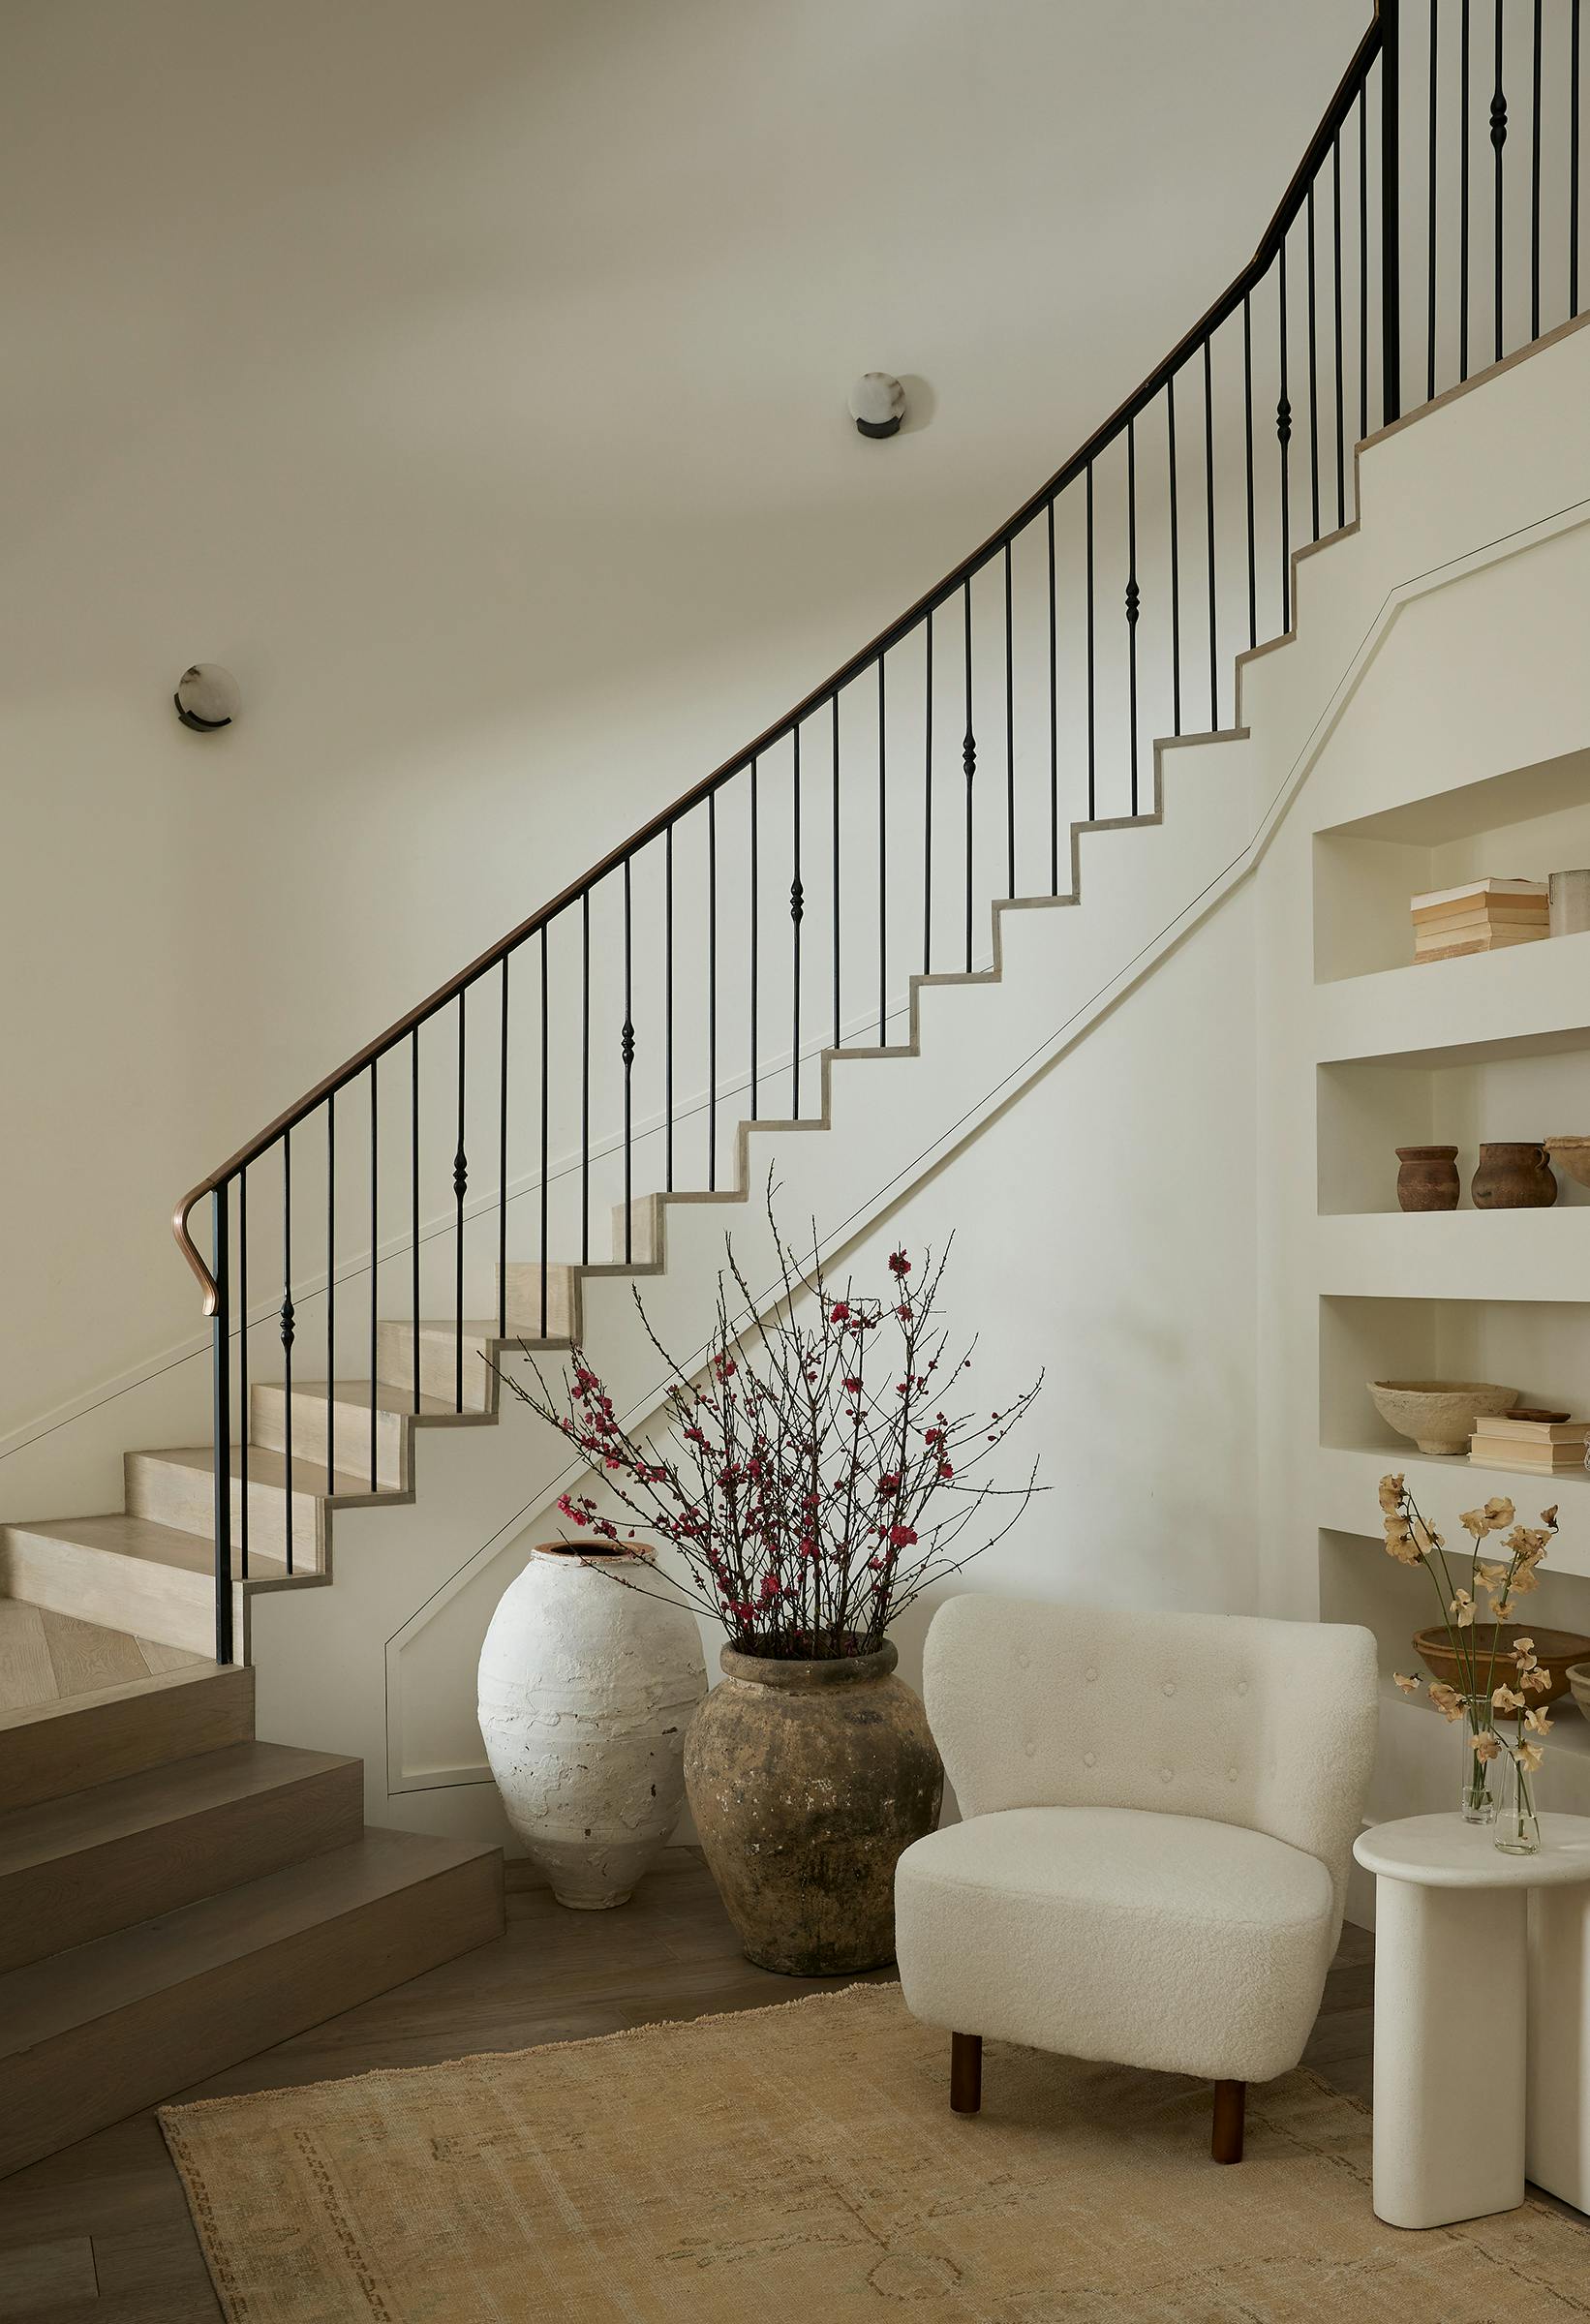 Nicole-Green-Design-Project-Johnson-Residence-Stairway